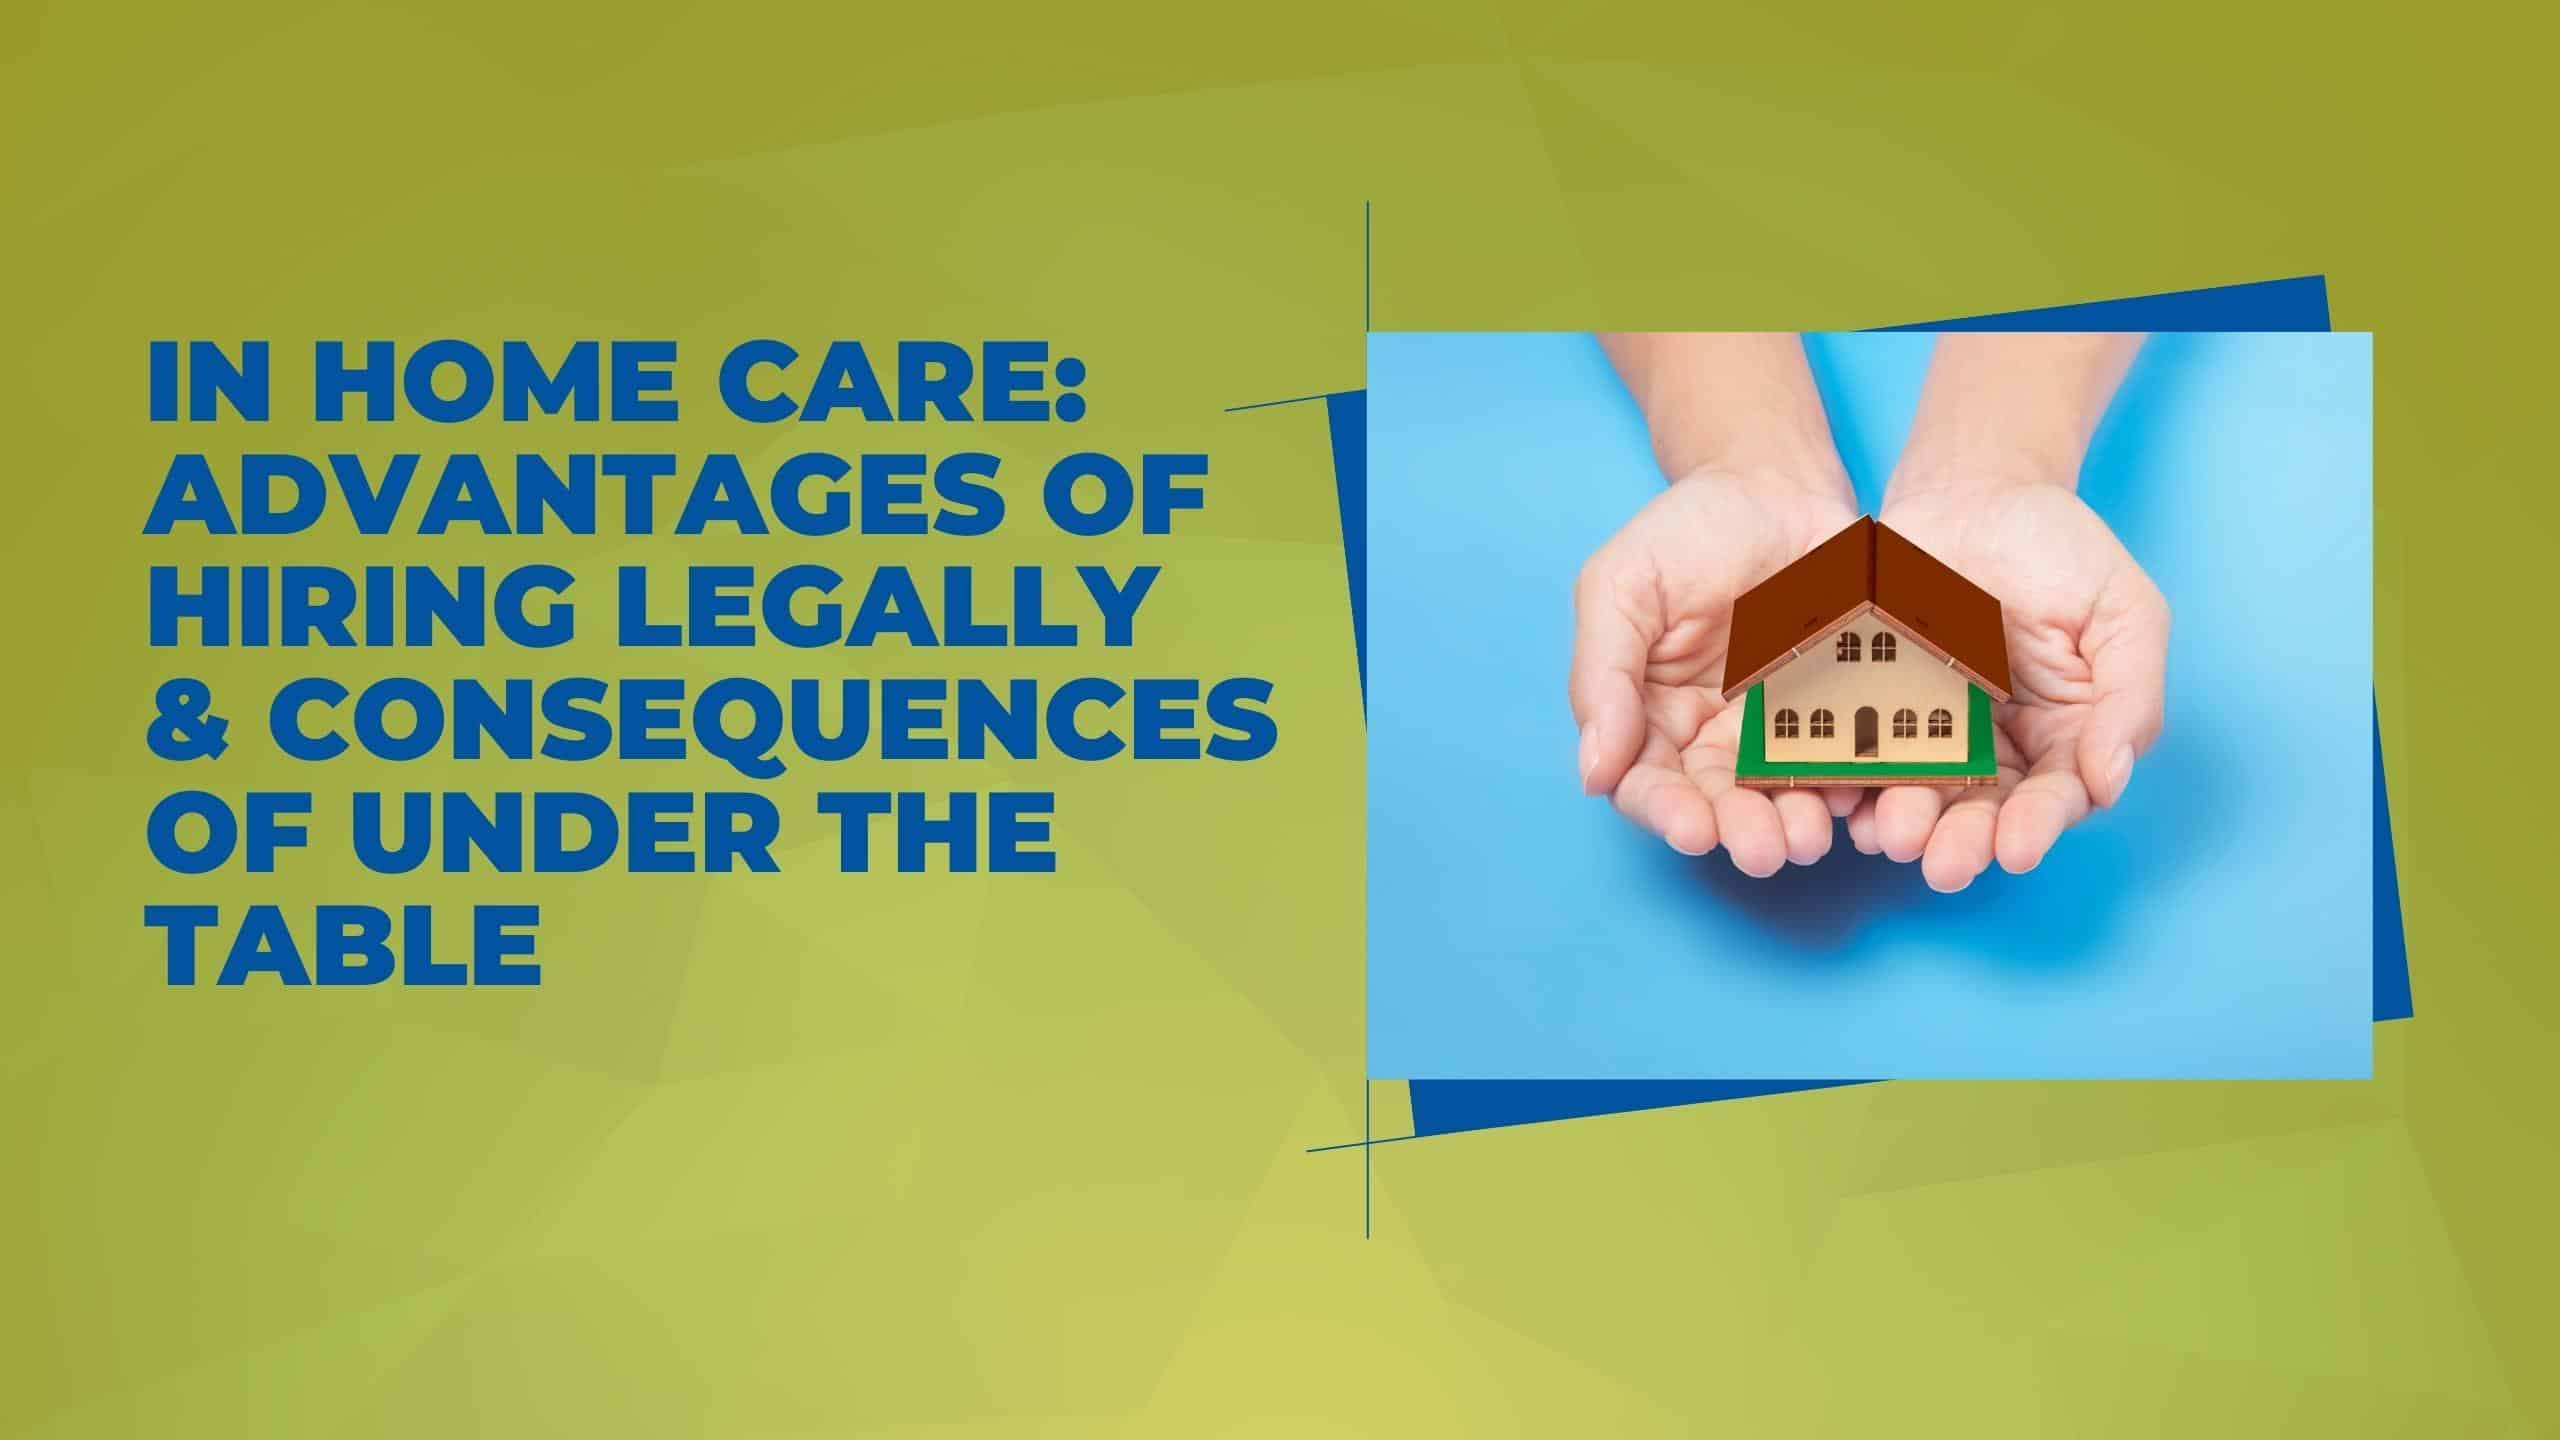 In Home Care: Advantages of Hiring Legally & Consequences of Under The Table